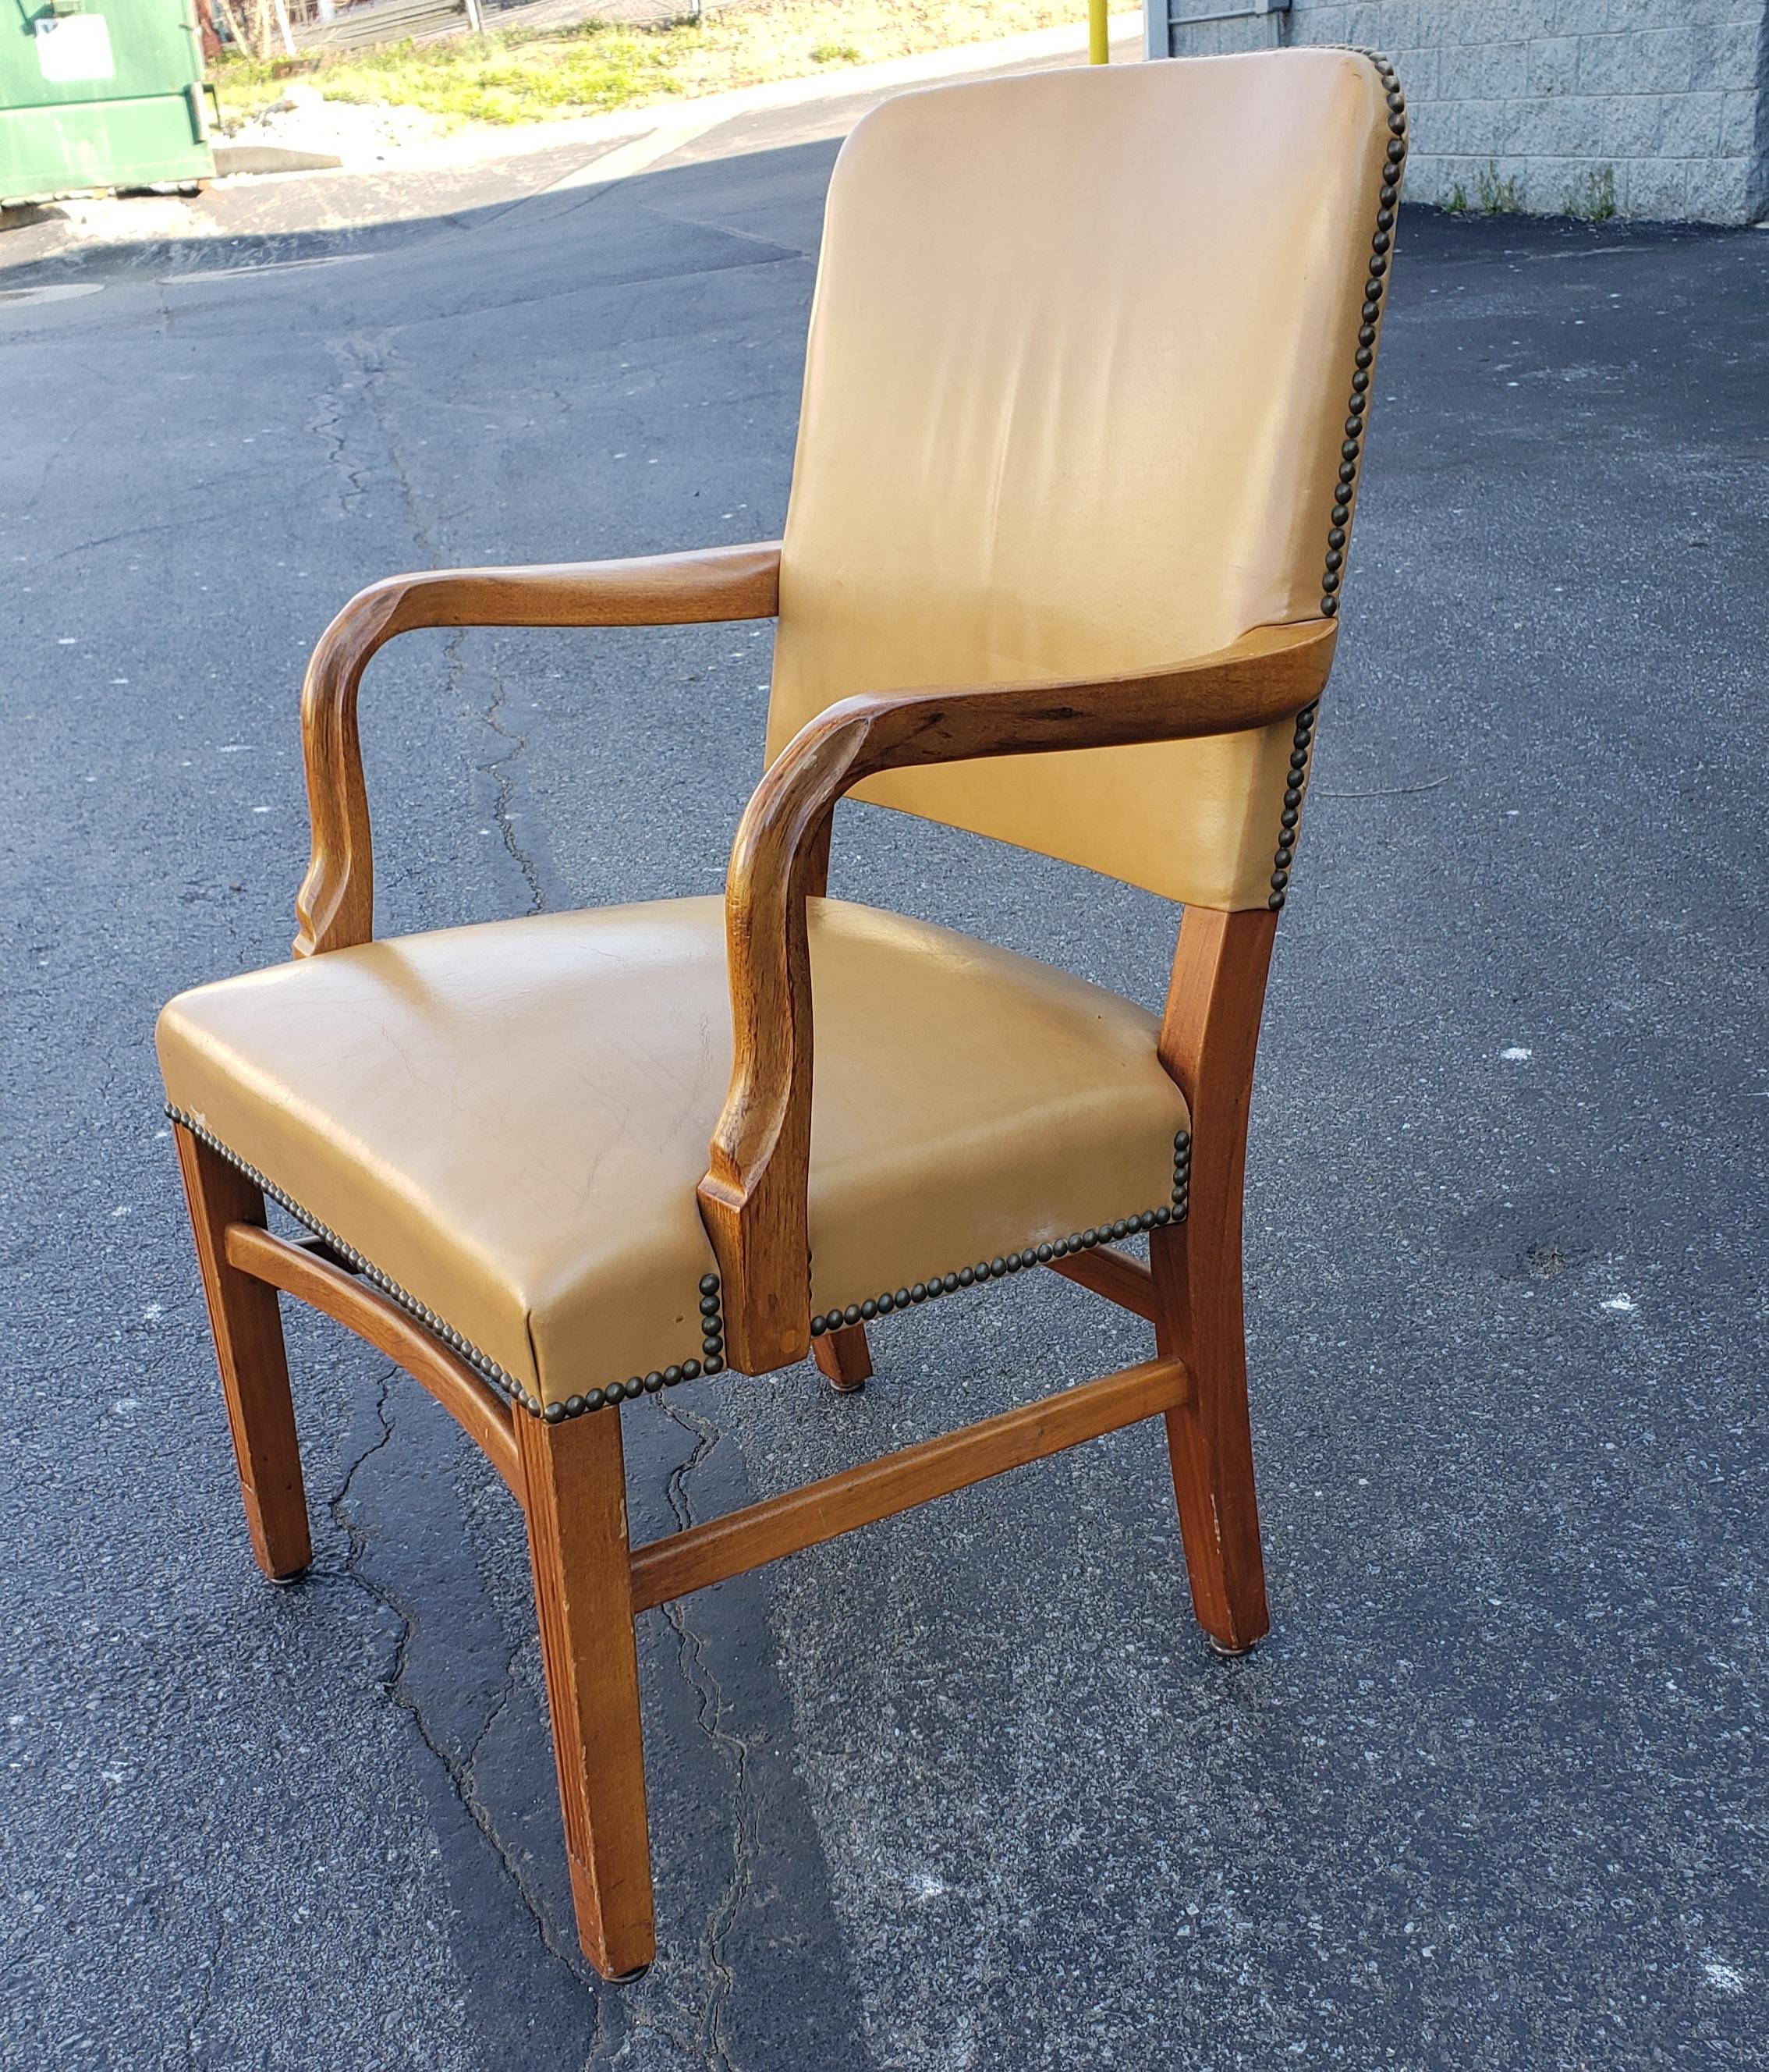 Pair of 1970s Gunlocke Fruitwood and Leather Armchairs In Good Condition For Sale In Germantown, MD